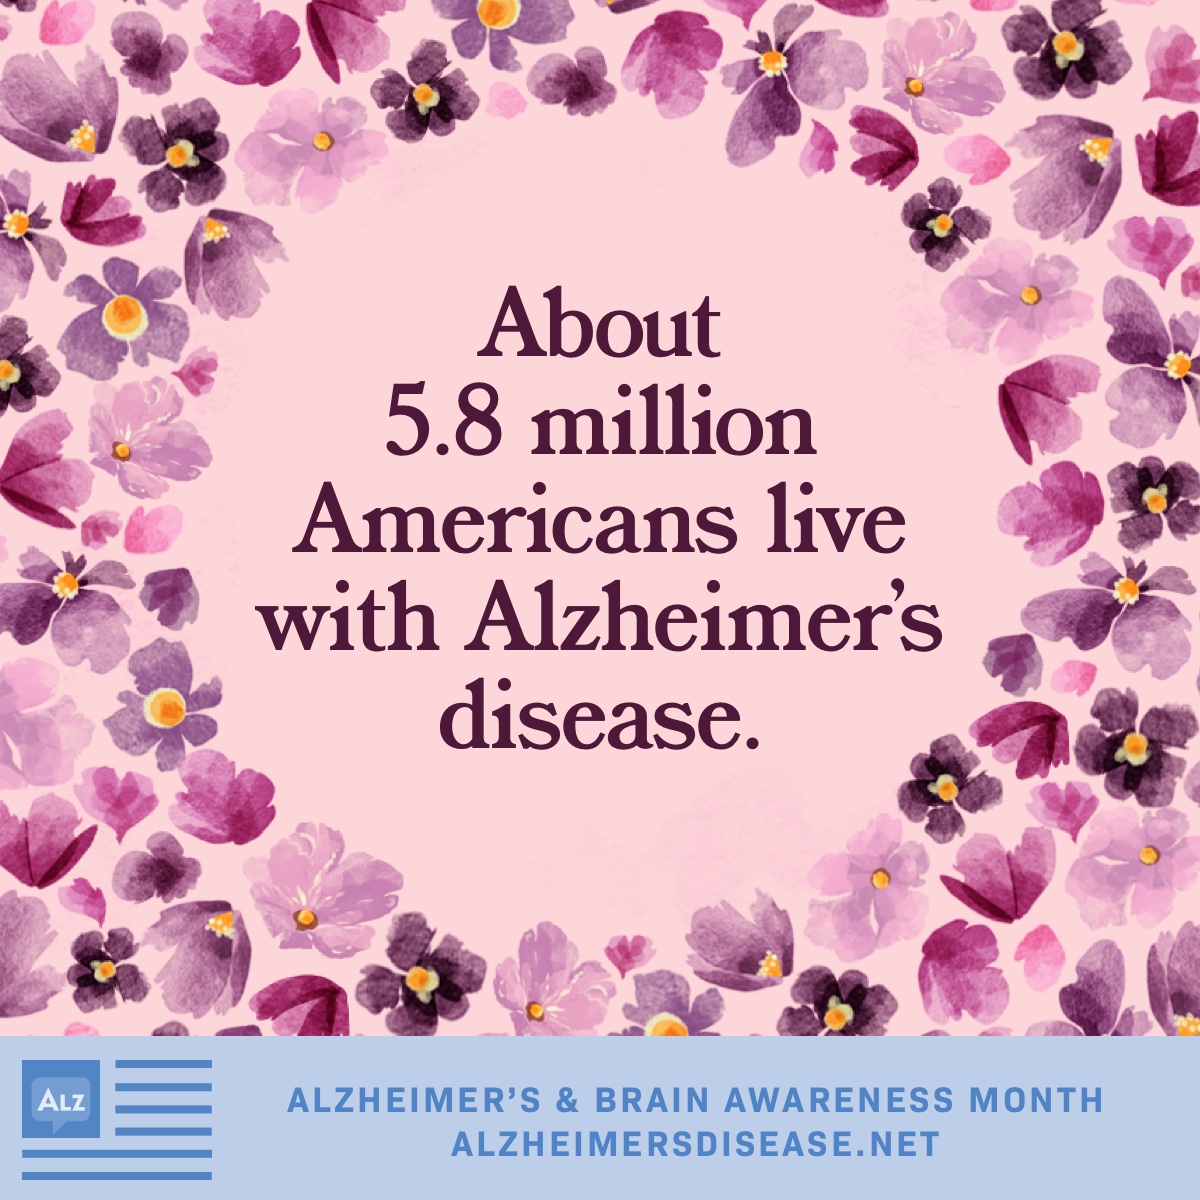 flowers surrounding text that reads About 5.8 million Americans live with Alzheimer's disease